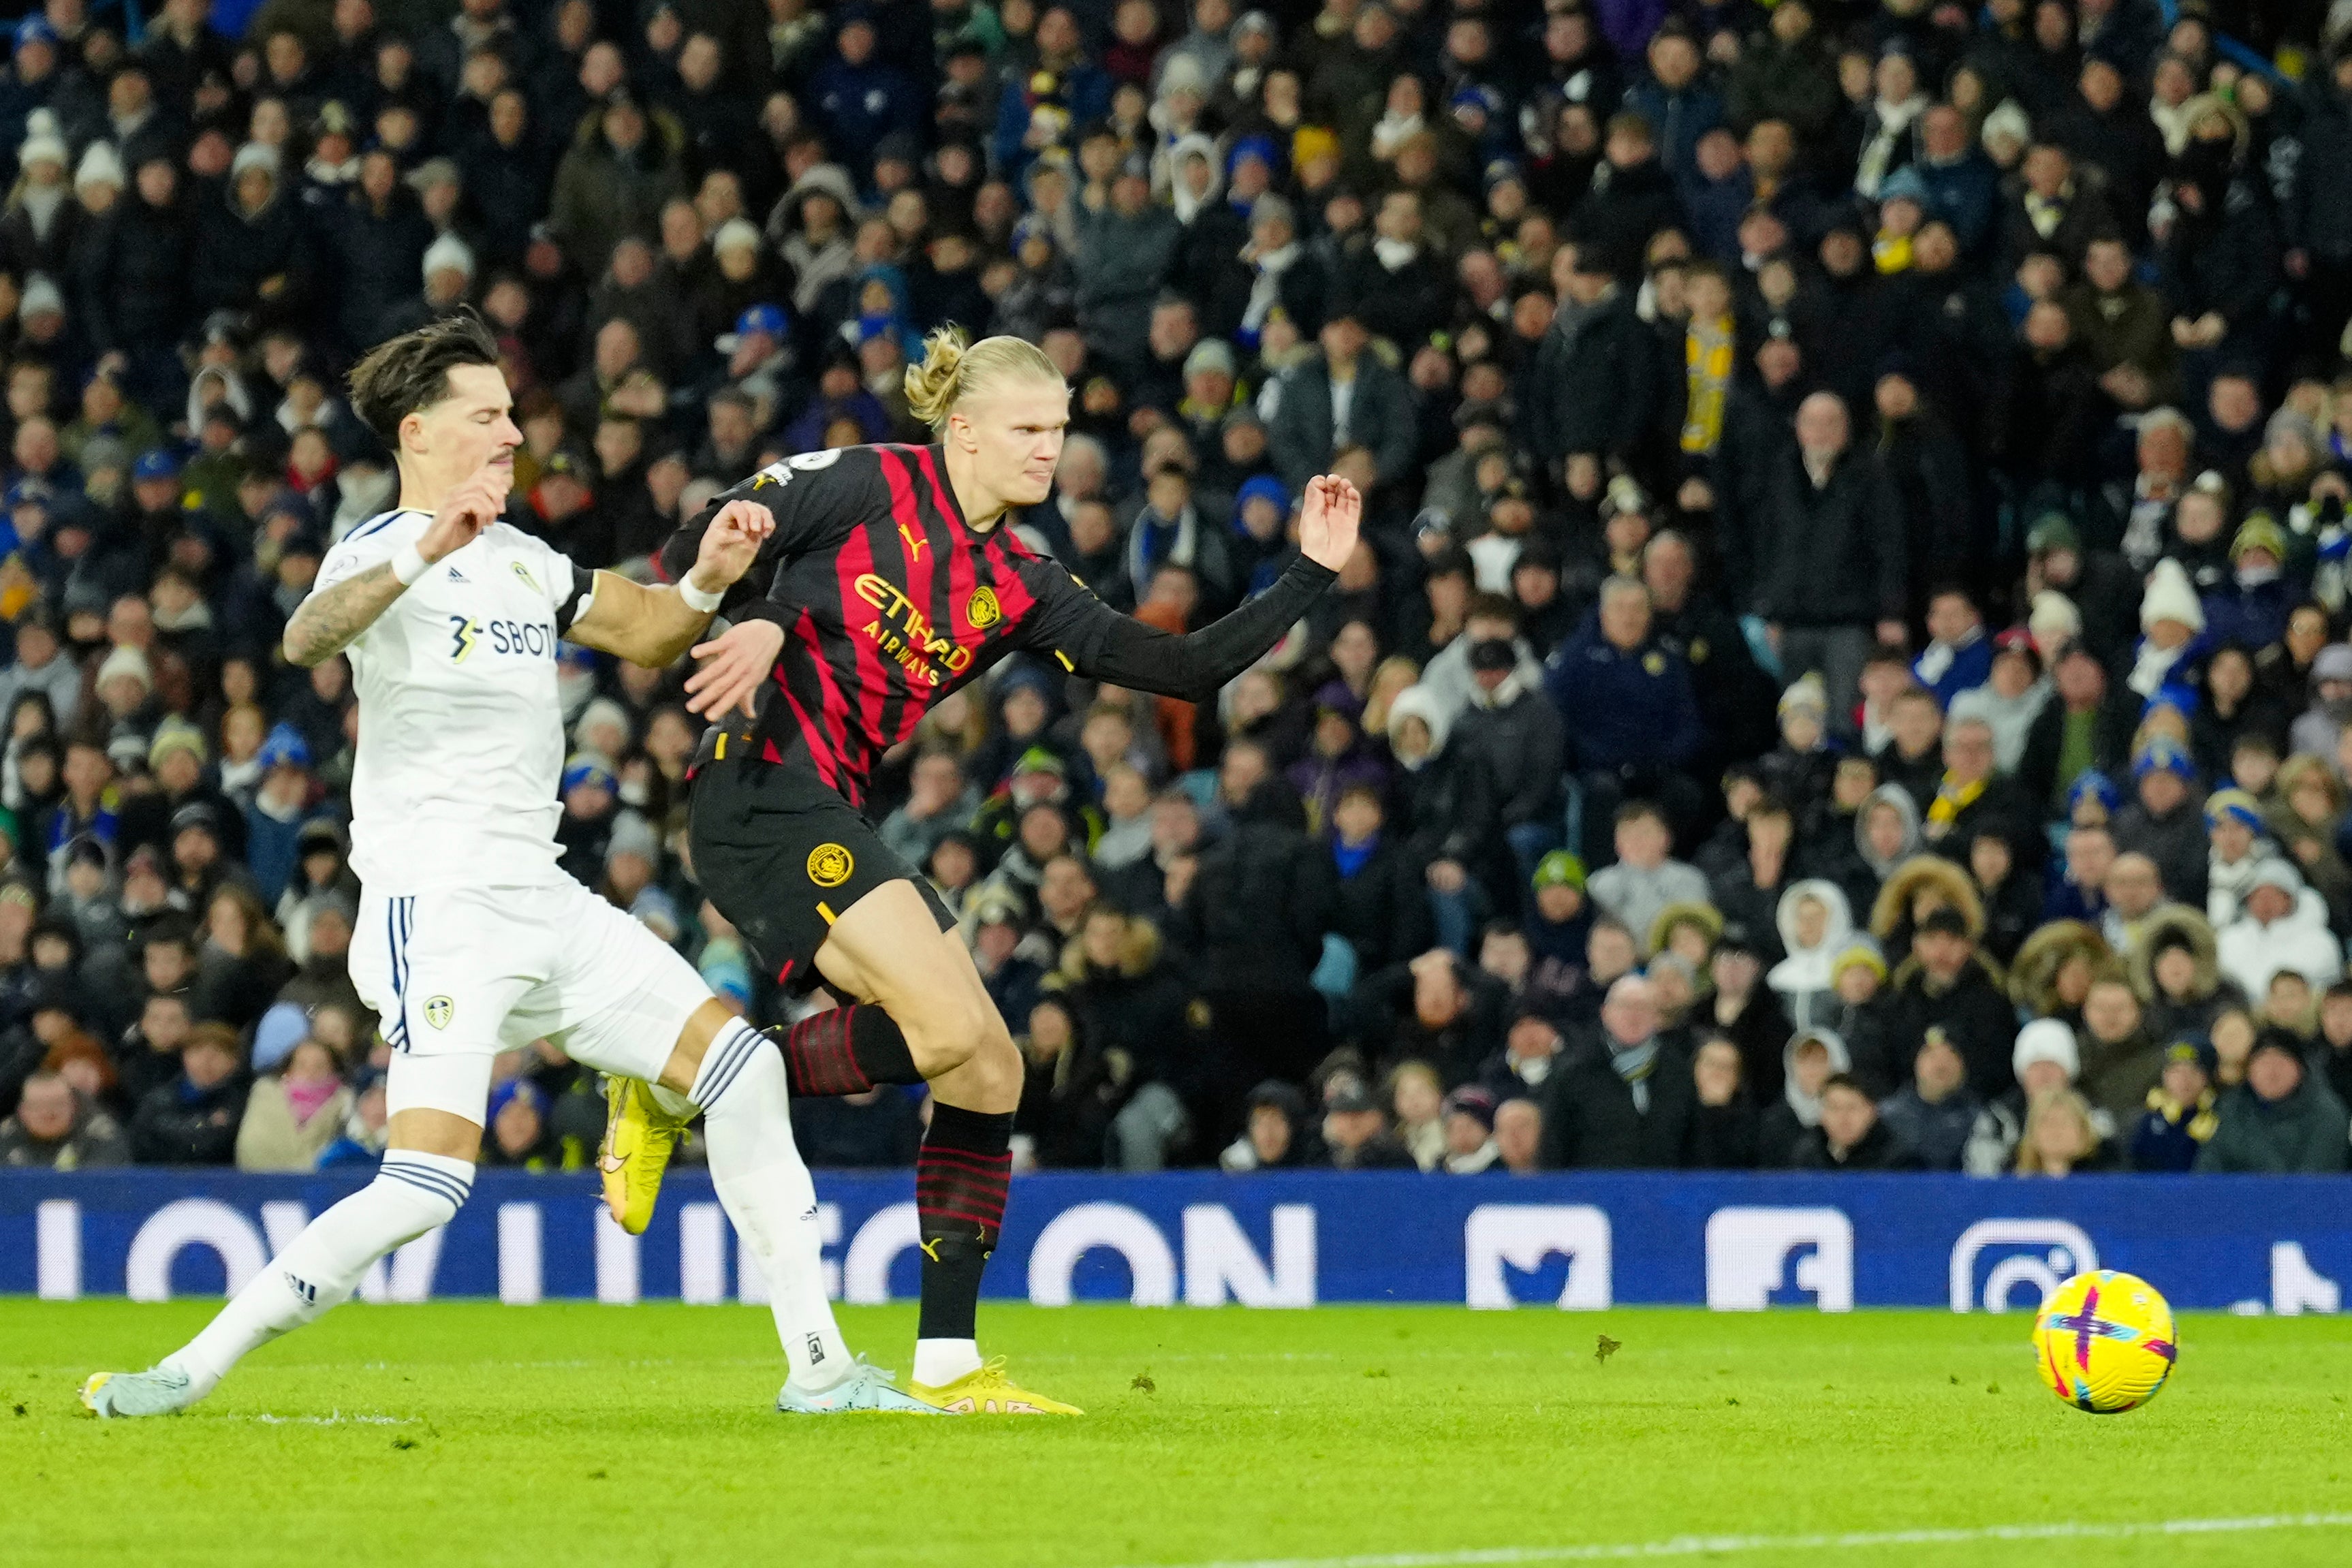 Erling Haaland slots home Manchester City’s second goal at Leeds